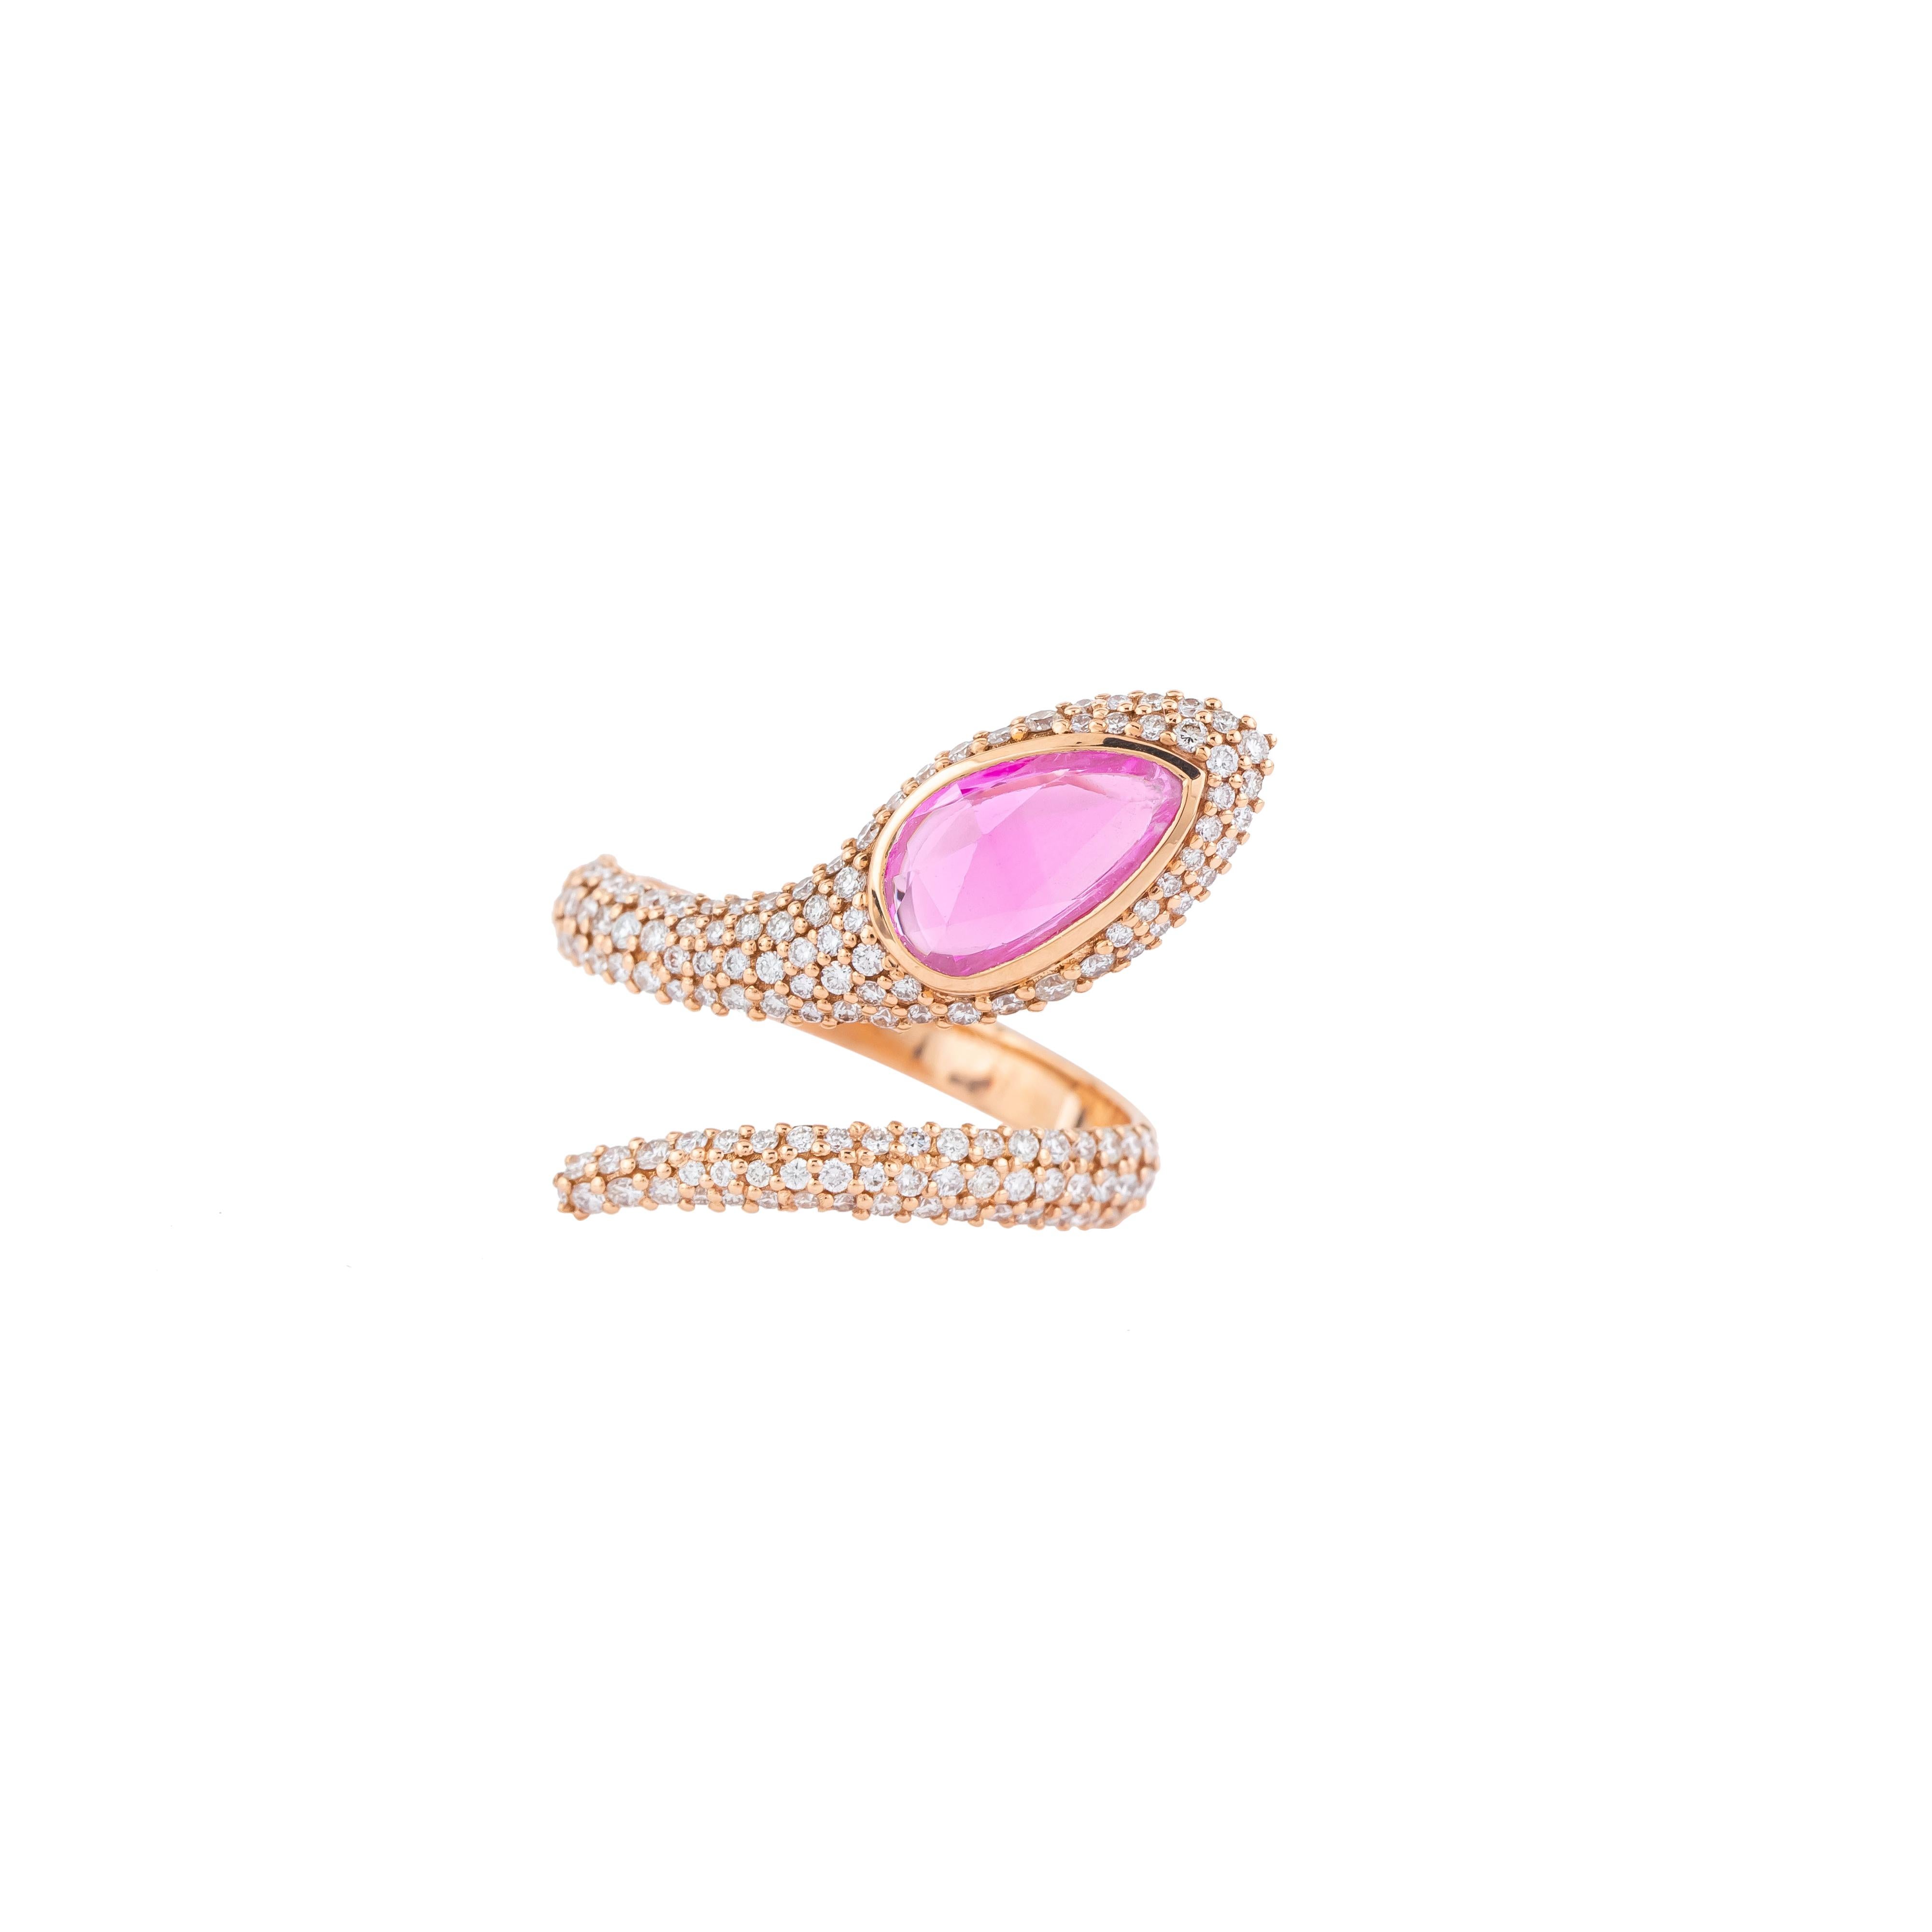 Immerse yourself in the world of luxury with our 18 Karat Gold 1.94 Carat Diamond and Pink Sapphire Cocktail Ring – a breathtaking fusion of sophistication and glamour. Crafted with precision and care, each ring is a unique masterpiece, meticulously